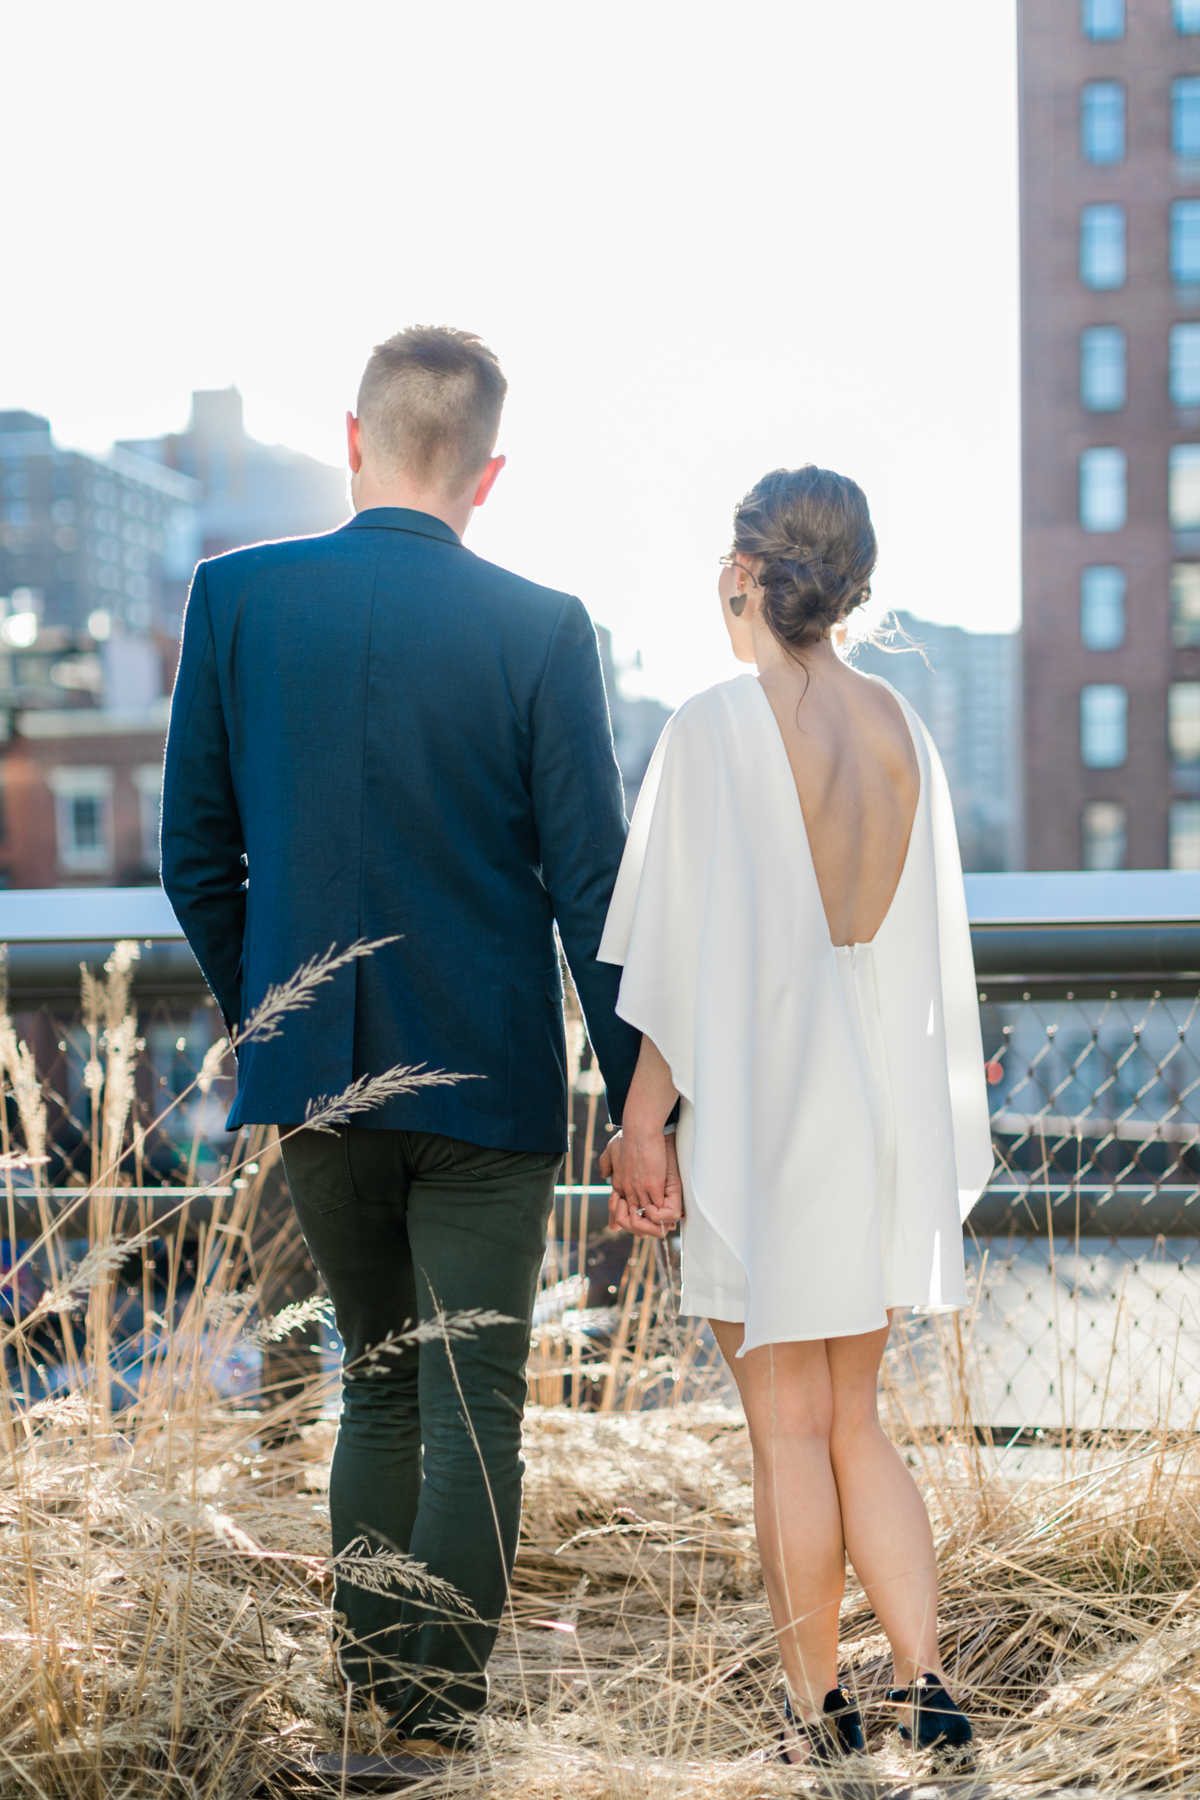 New York City Film Photographer | High Line Engagement Session | Couples Photos on High Line